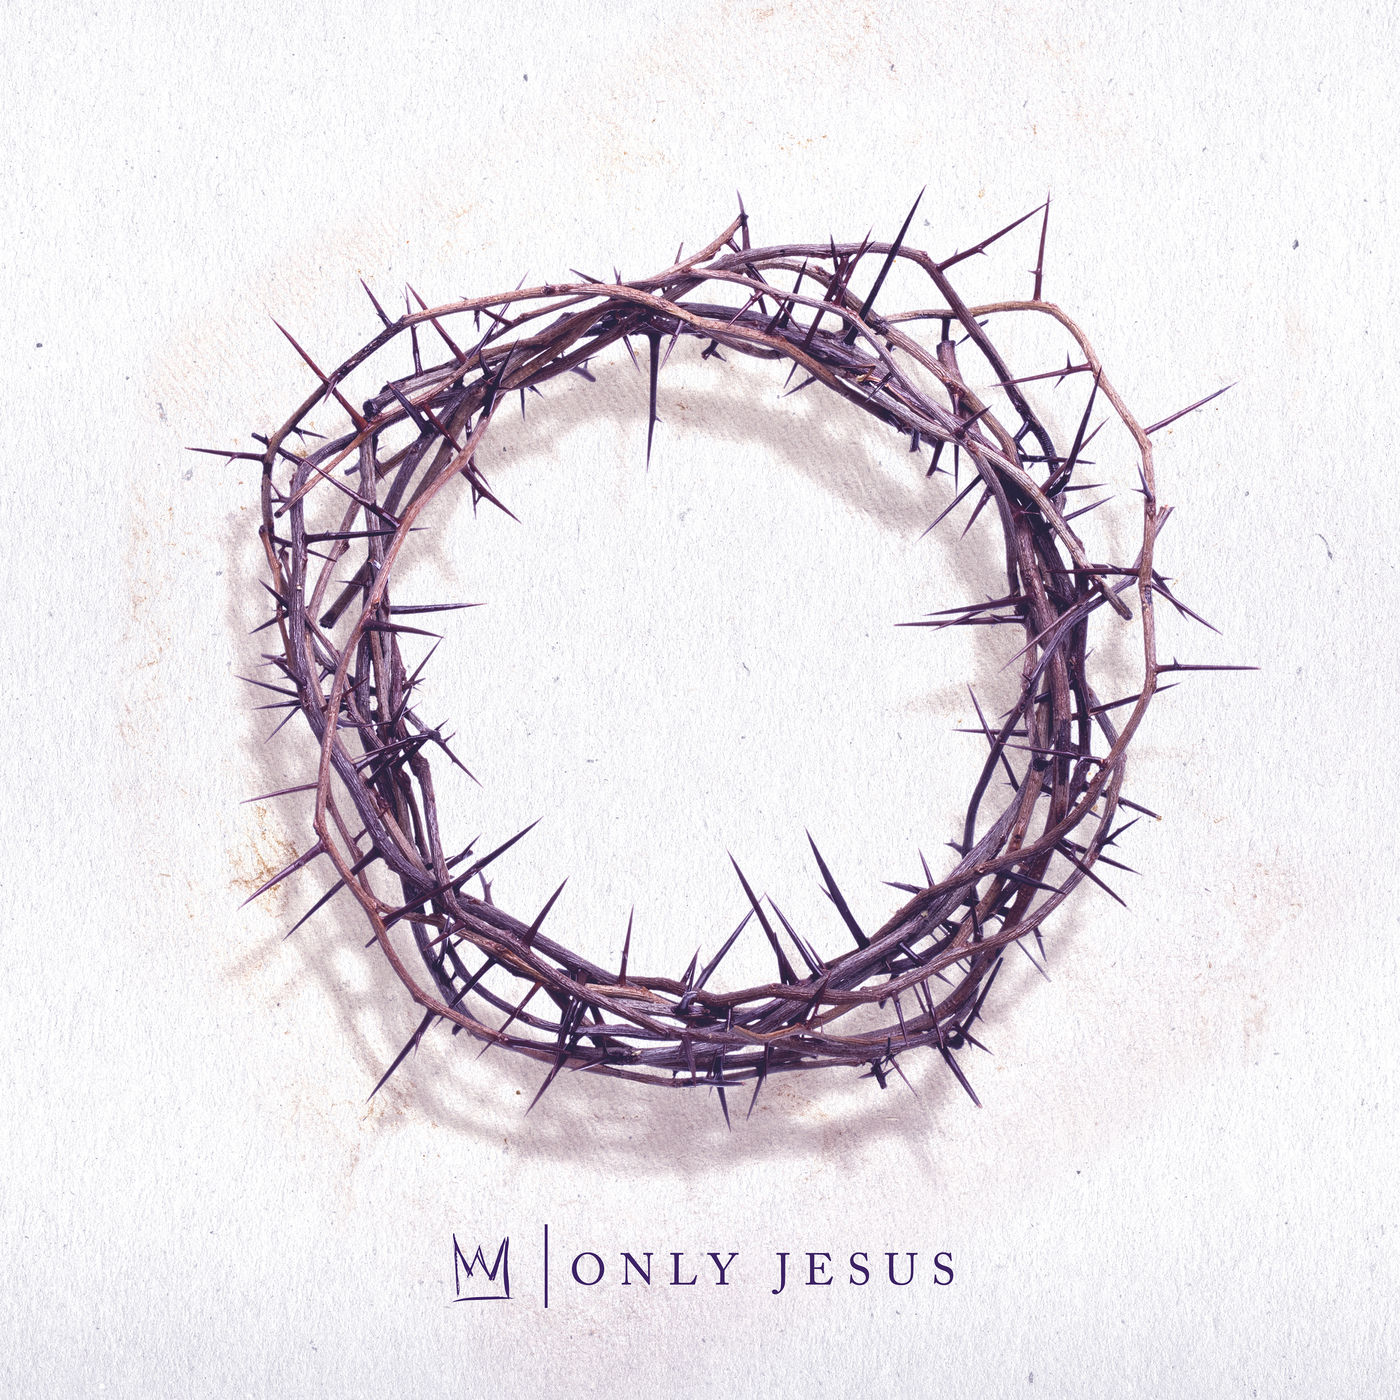 Casting Crowns - Only Jesus (2018)